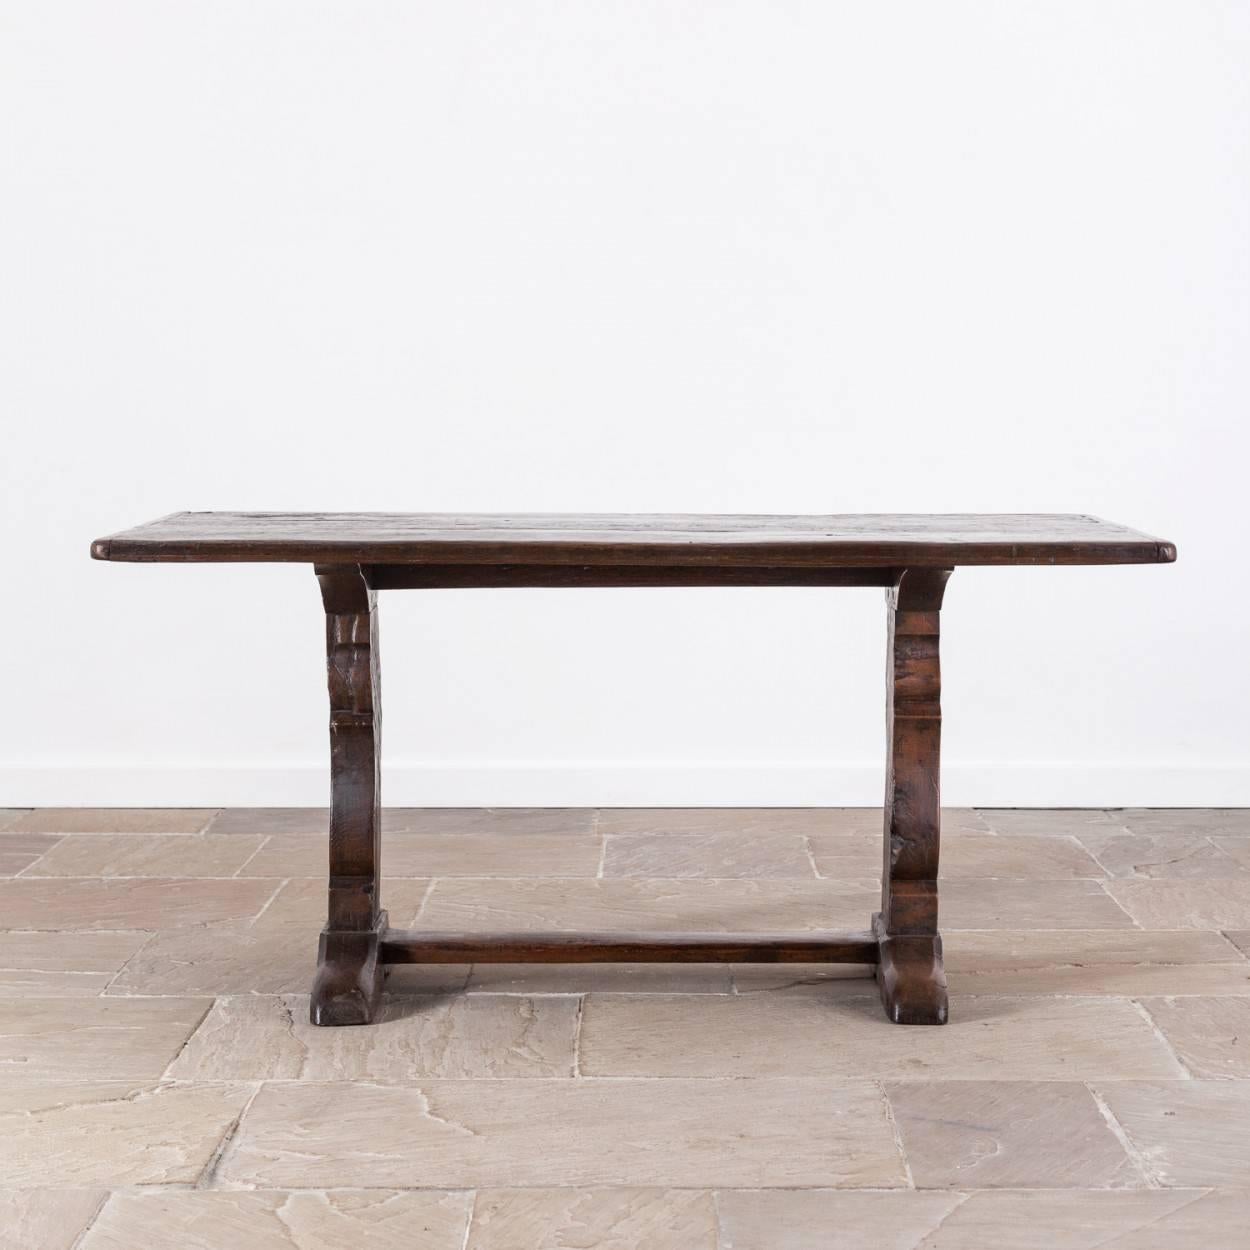 Very attractive 19th century trestle table. The top is made from older 17th century timbers.

Measure: 72cm high, 156cm long and 79cm deep.